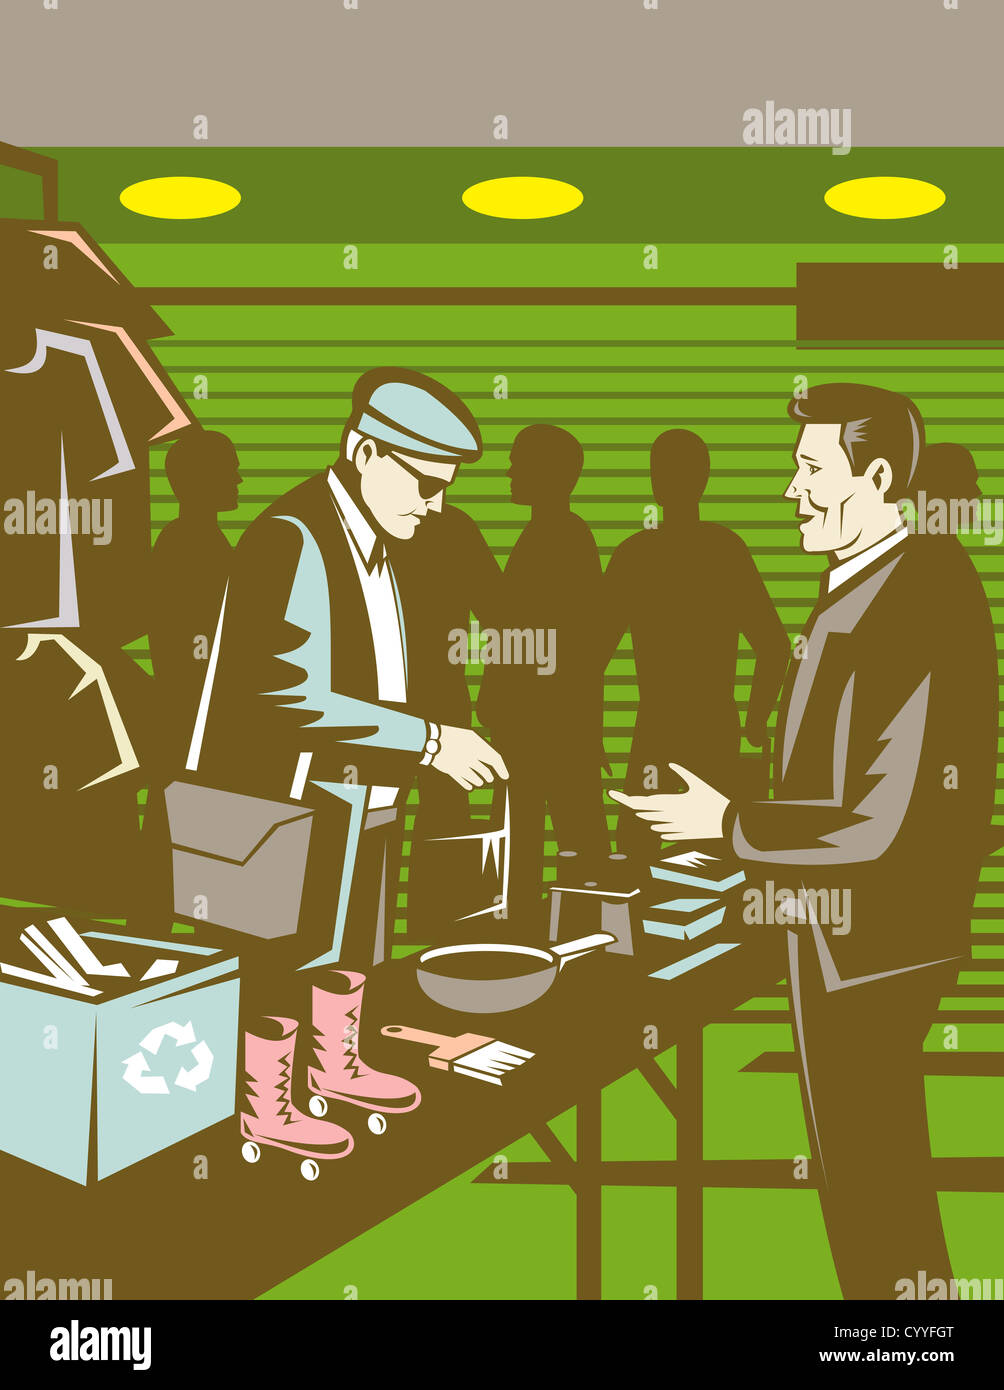 Illustration of a flea market selling trading goods done in retro style. Stock Photo